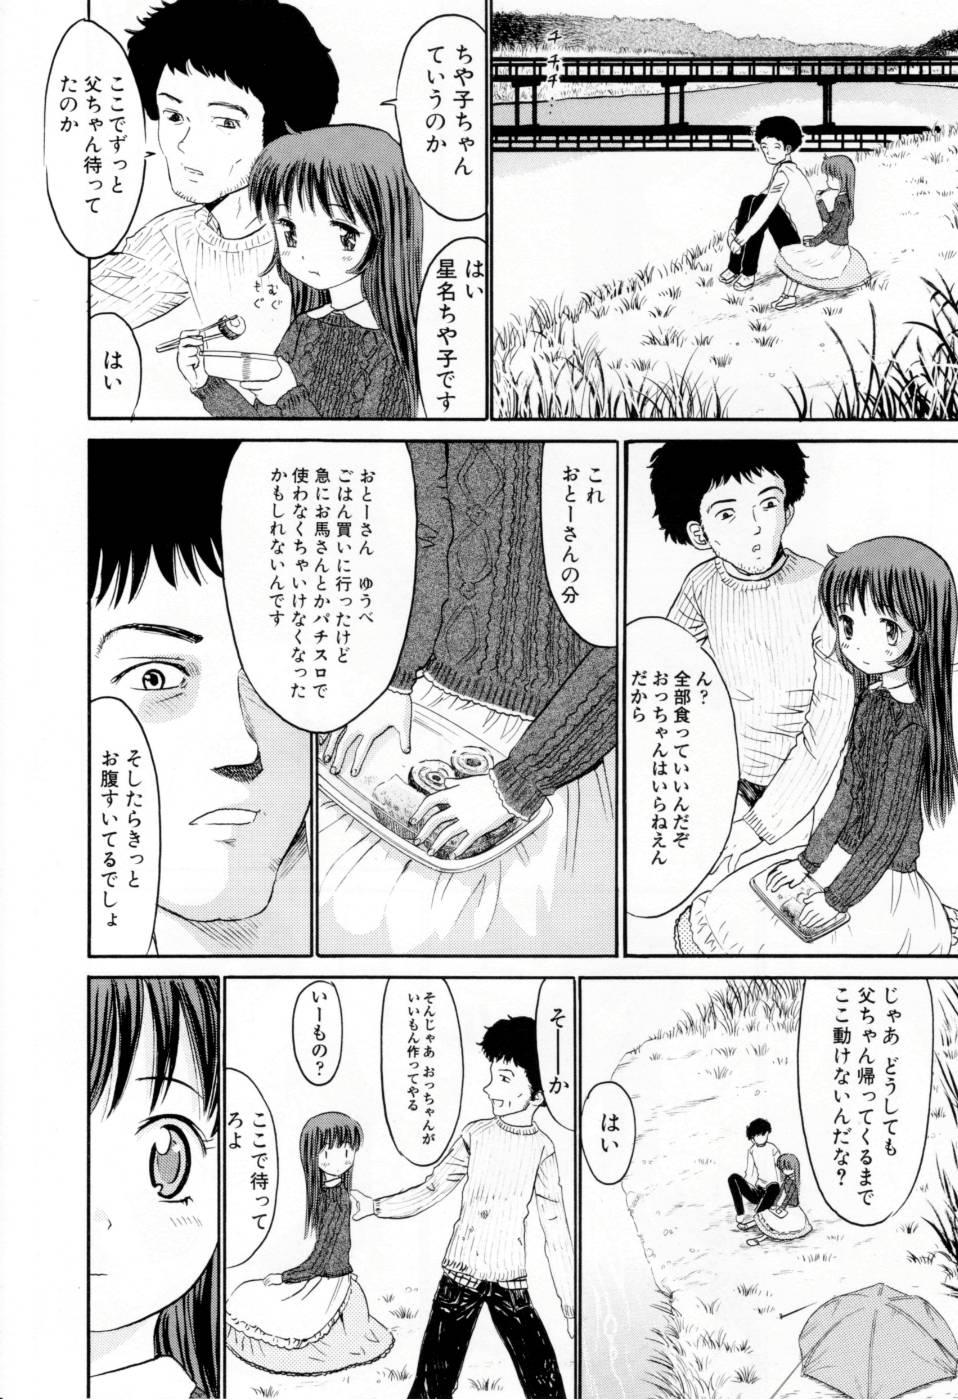 Ink Amakute Kiken na Kaerimichi - The road which returns is dangerous sweetly White - Page 11